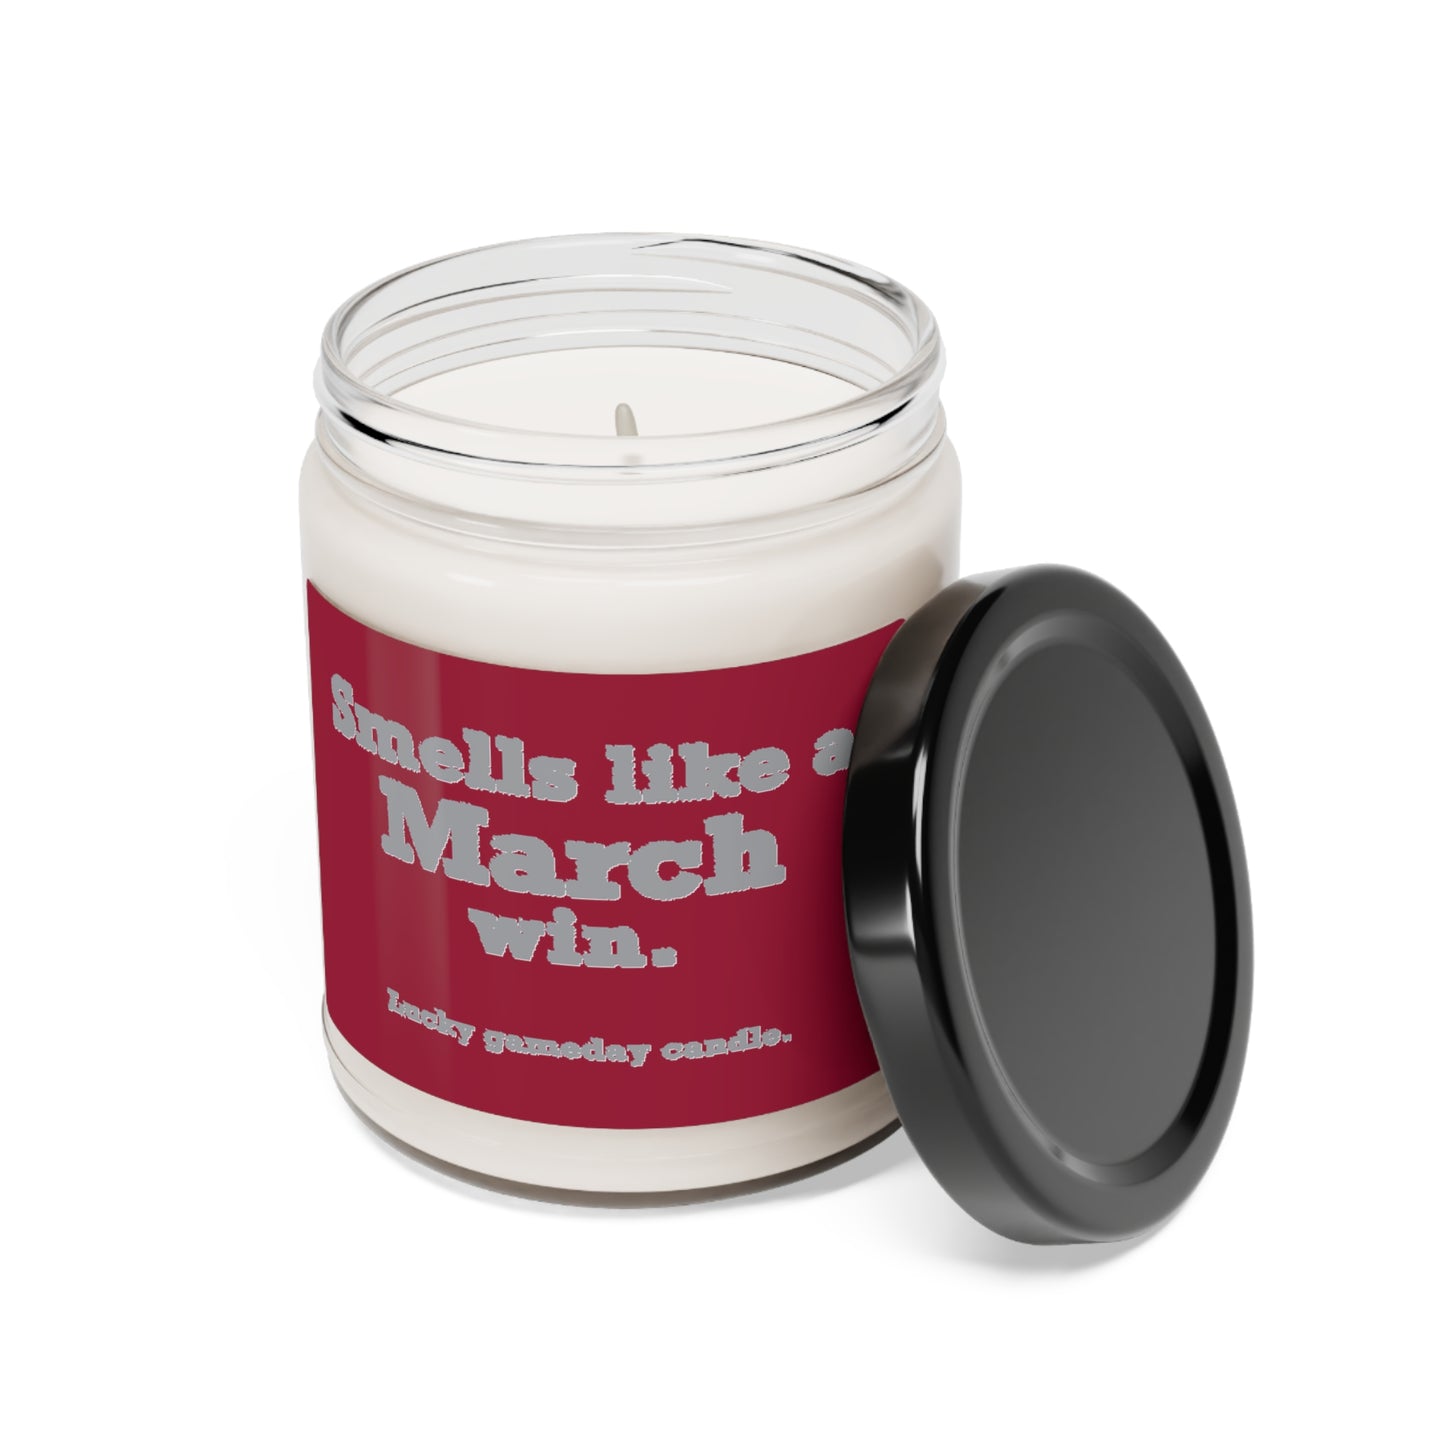 North Carolina Central - "Smells Like a March Win" Scented Candle